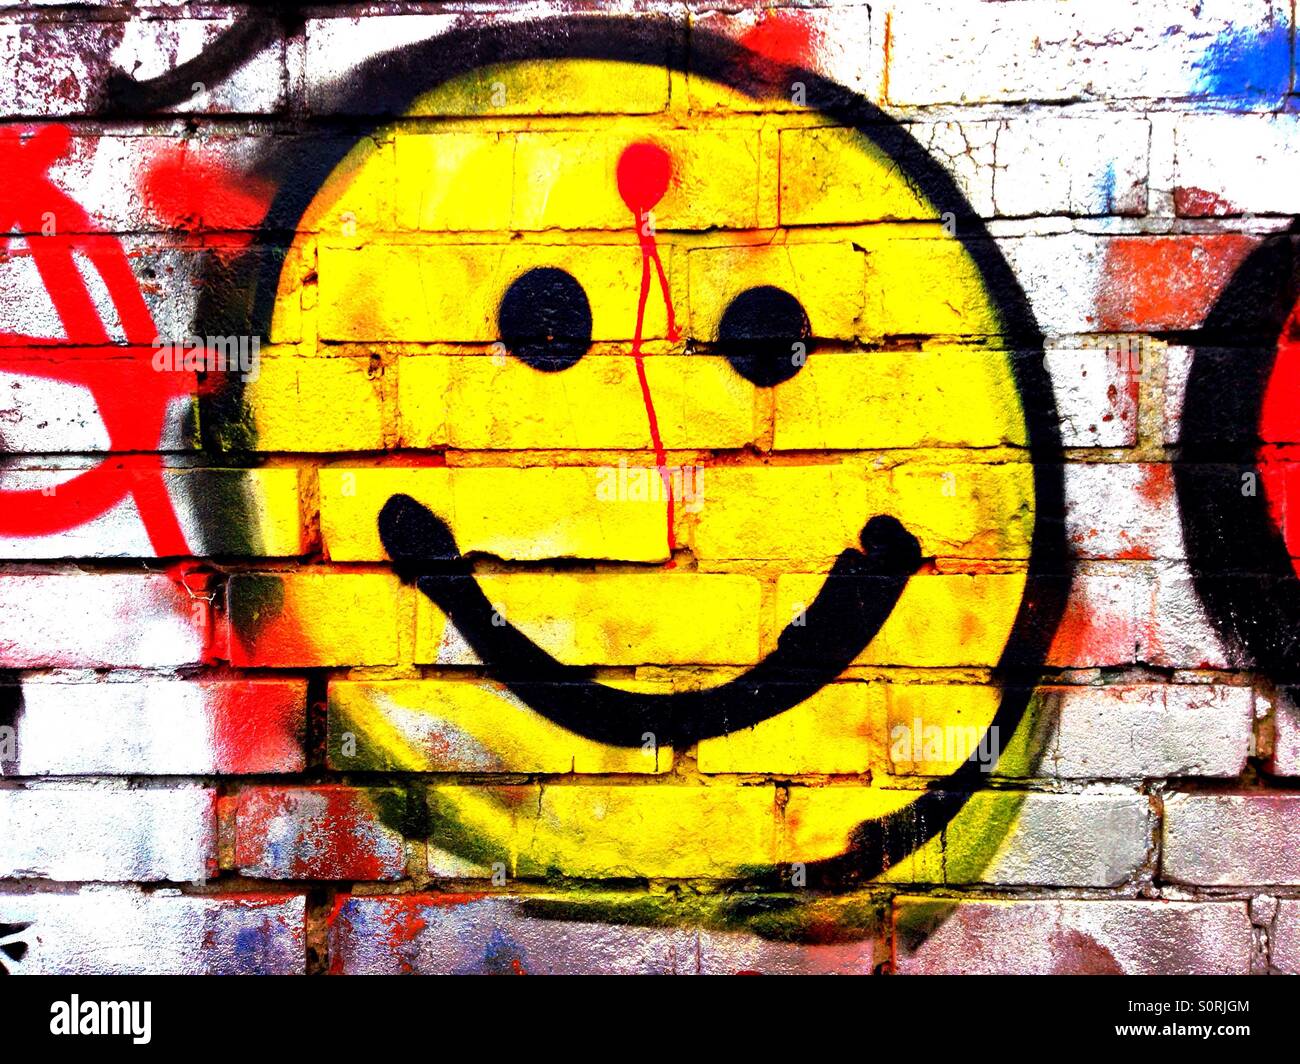 Smiley graffiti with a red dot on the forehead, like a gunshot wound Stock Photo